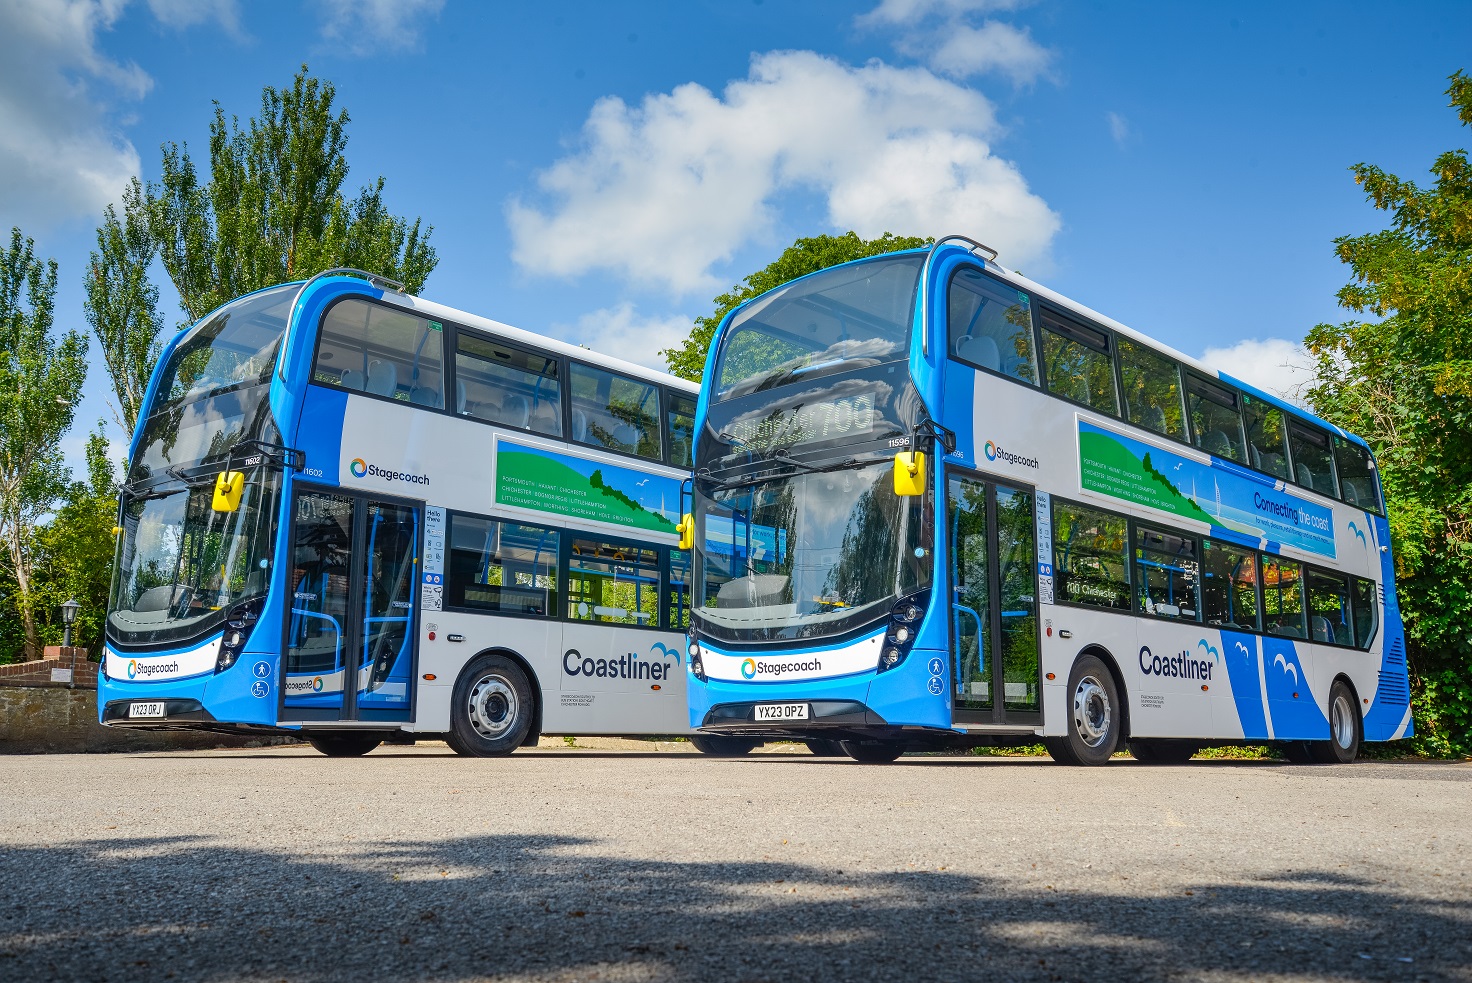 Stagecoach South takes new Enviro400 fleet for Coastliner 700 route